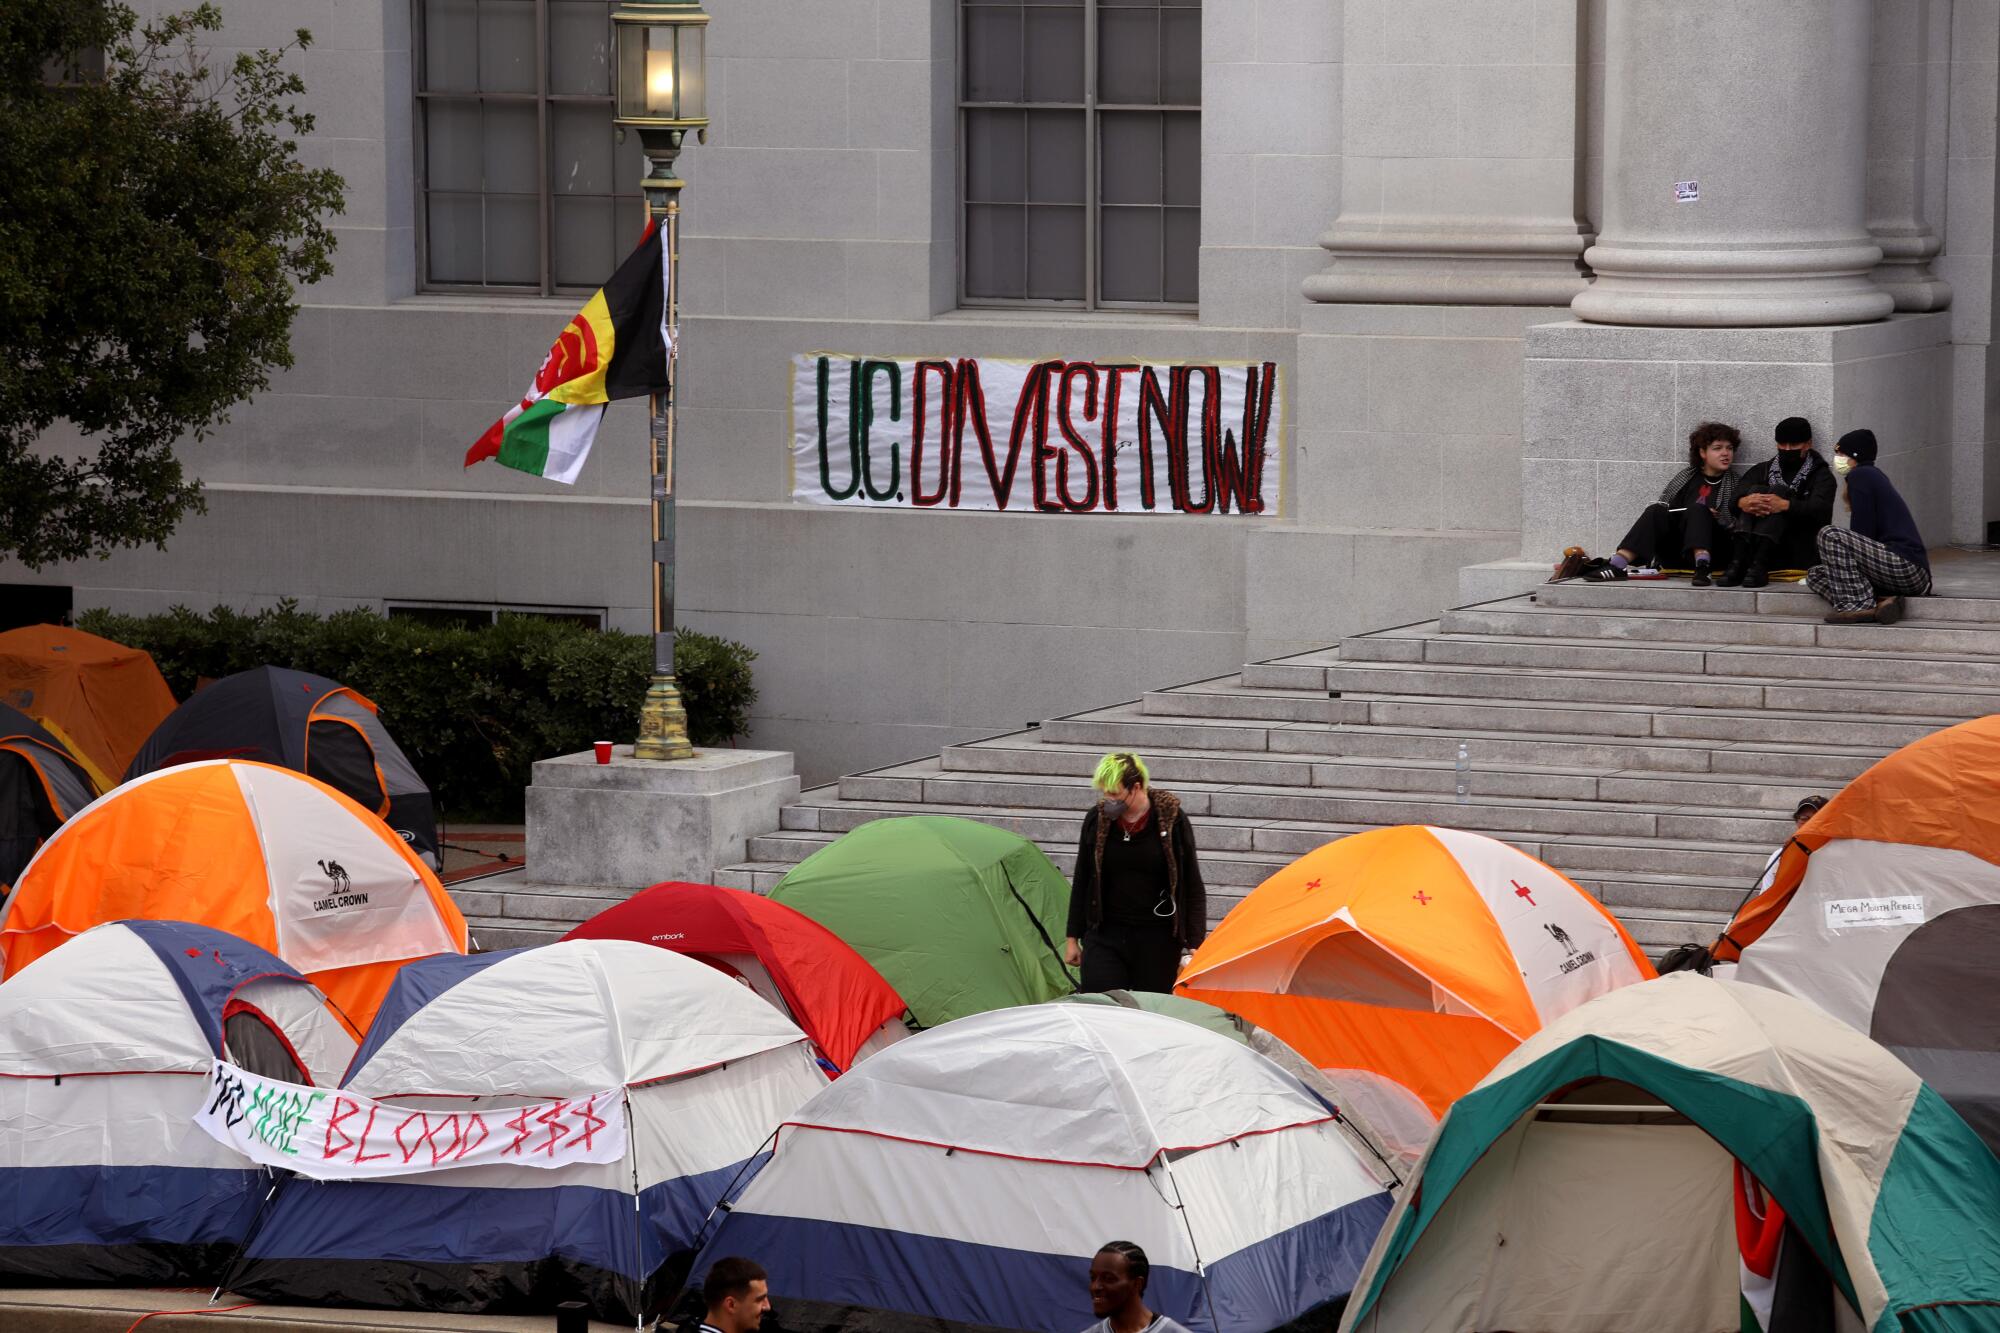 Students and concerned citizens camp in front of a campus building.